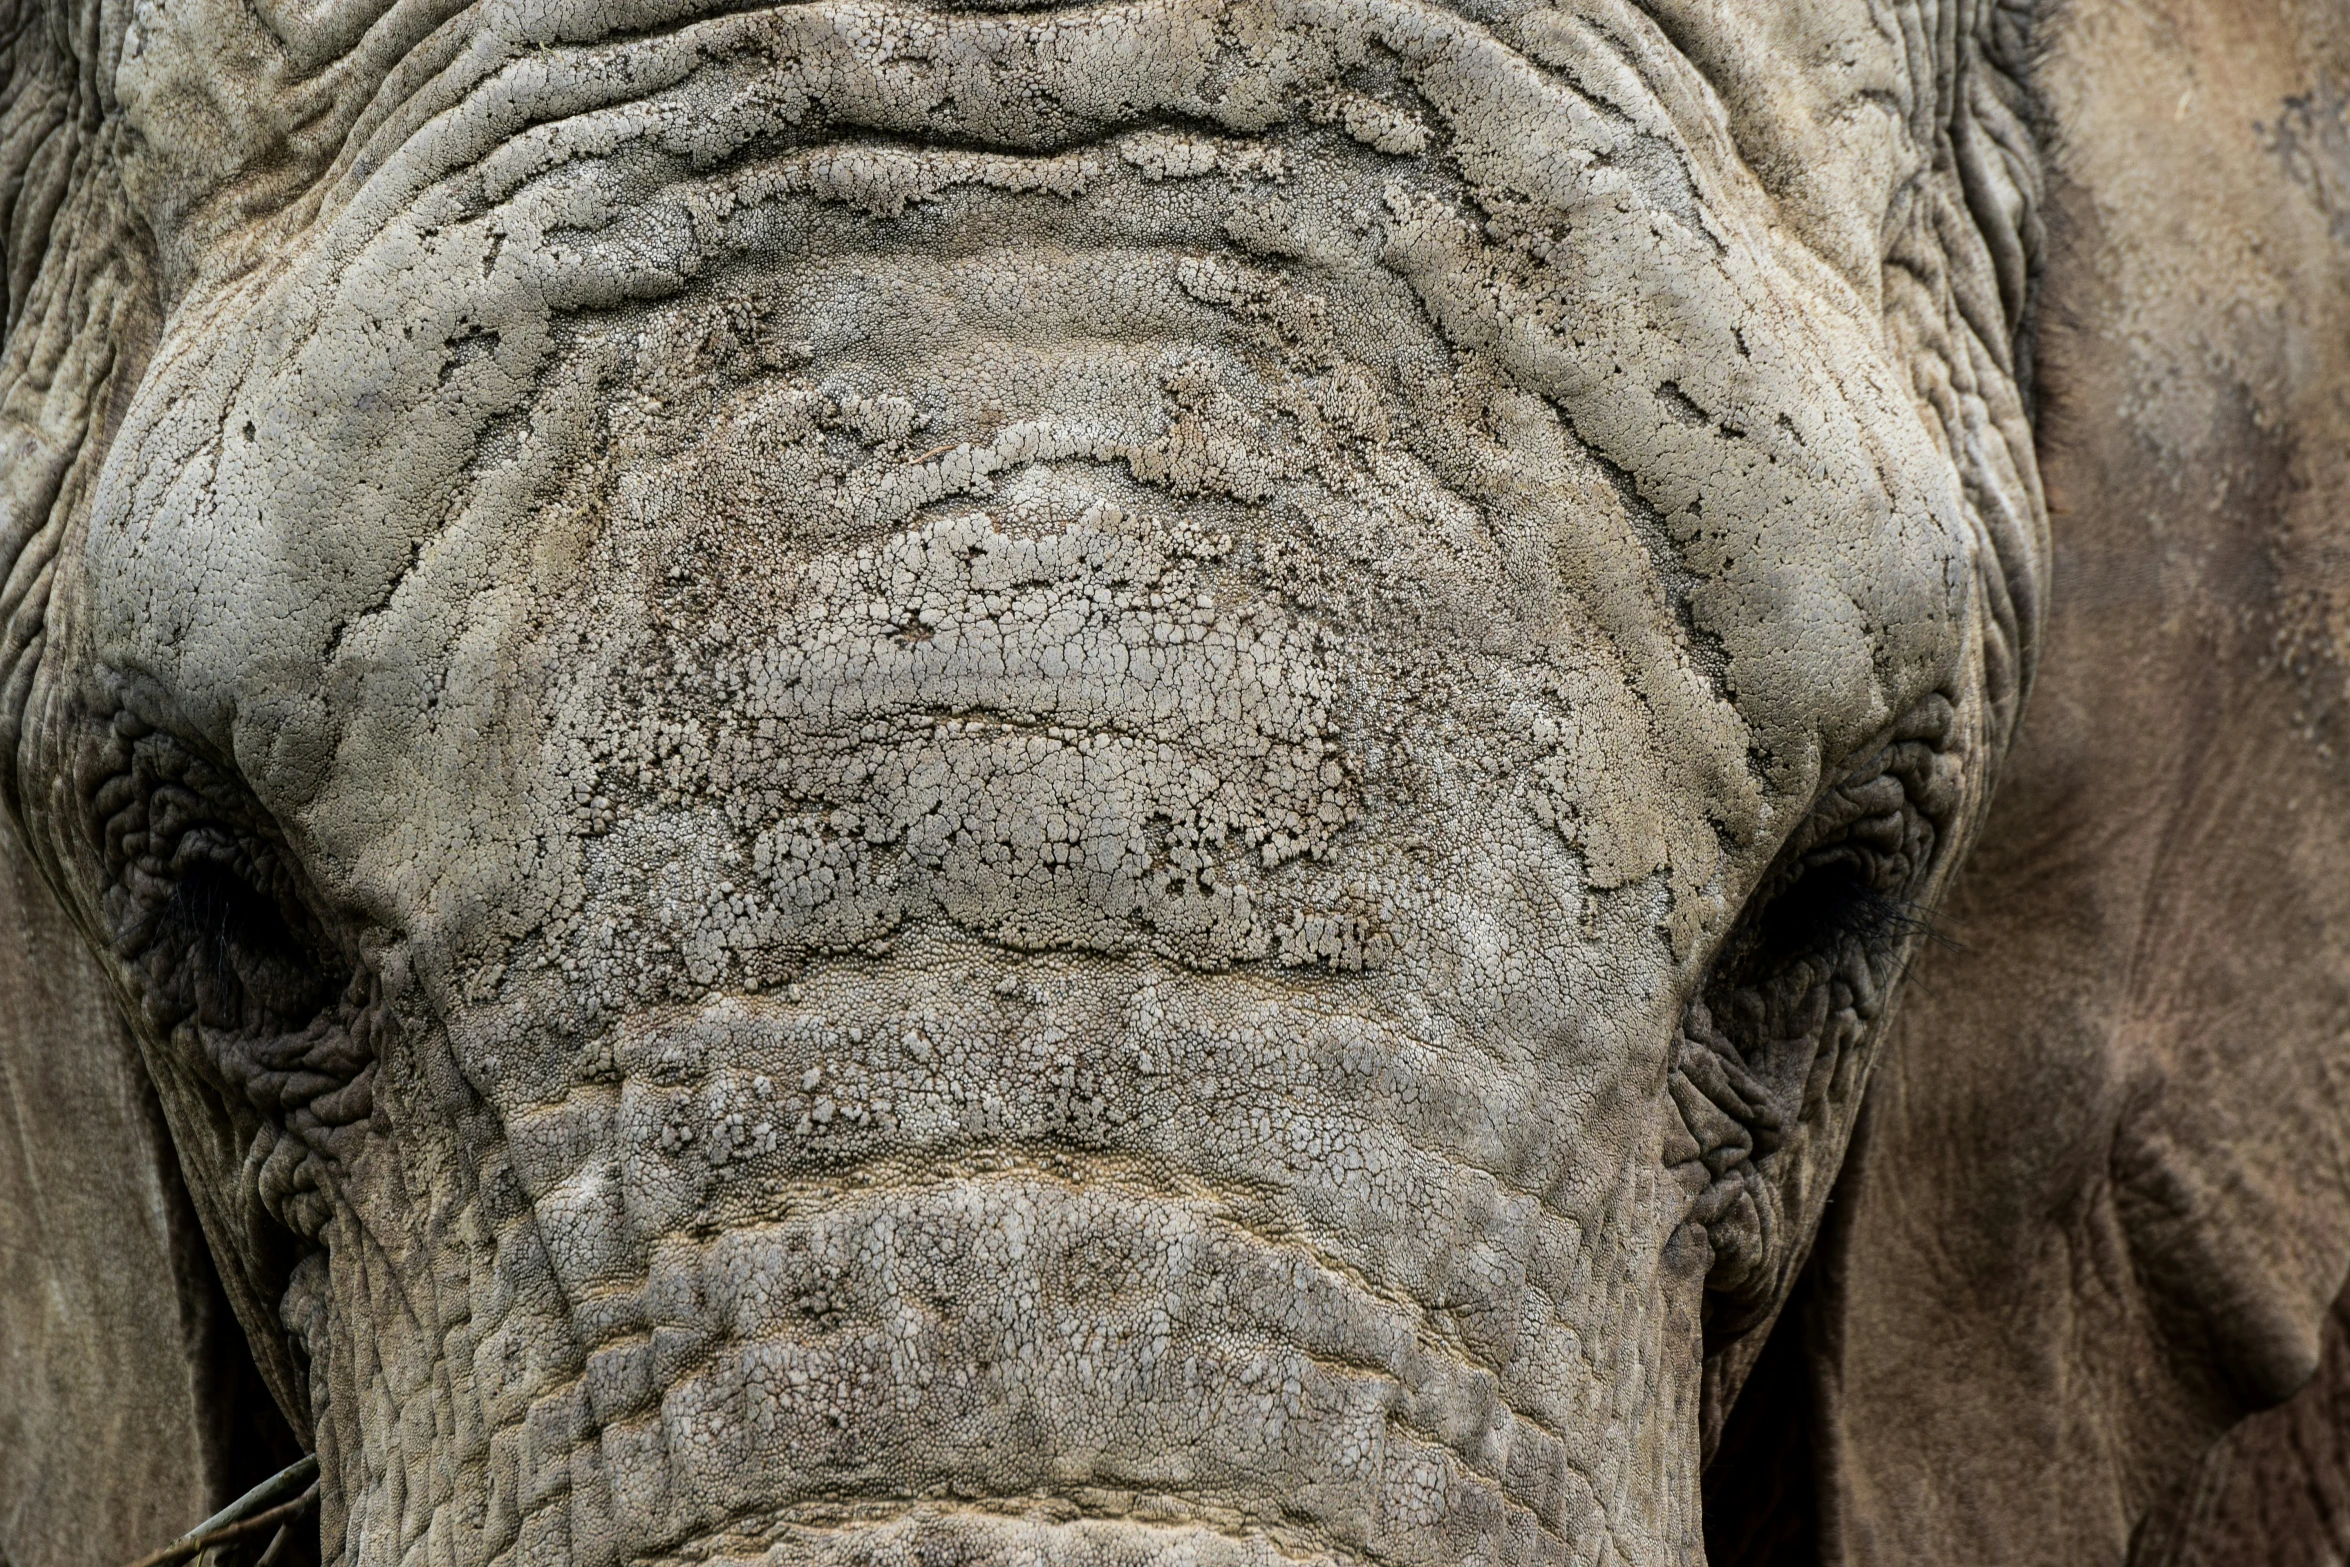 close up image of the face and body of a large elephant